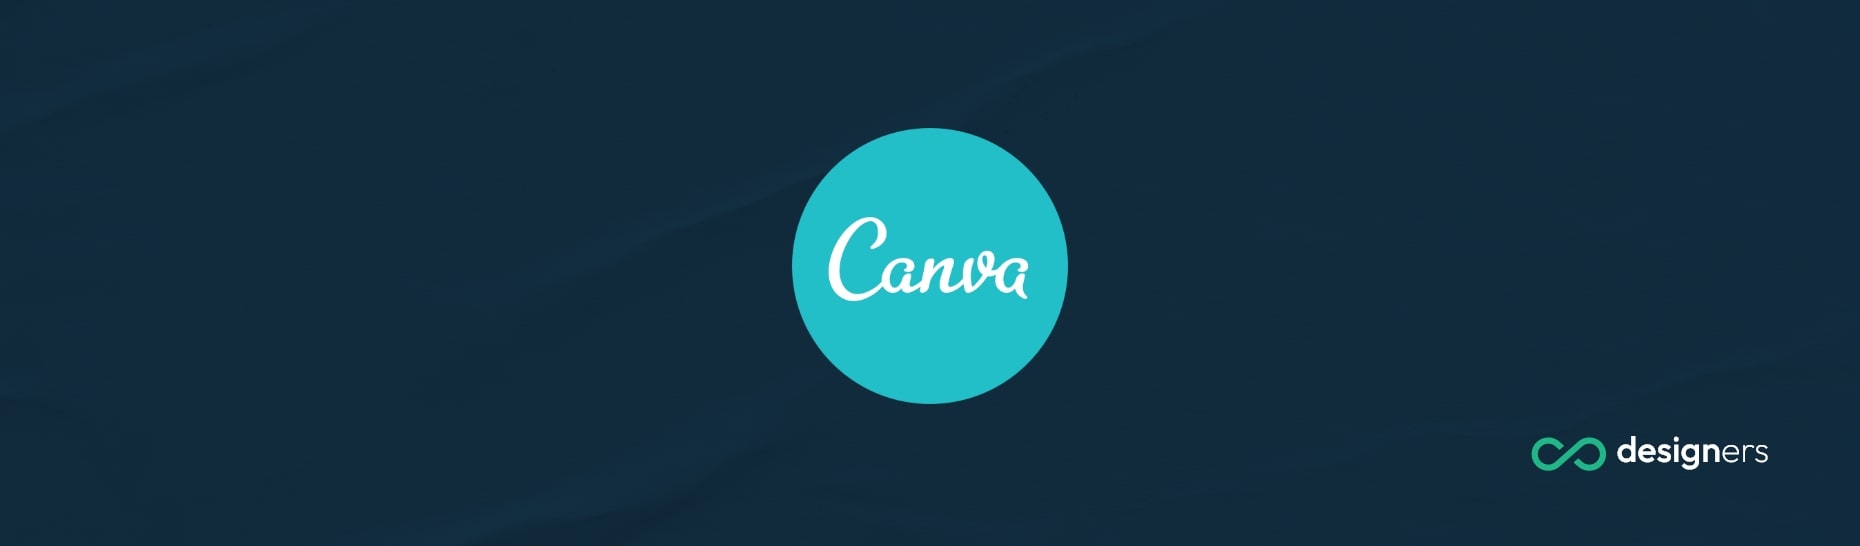 Does Canva Work on Windows 10?